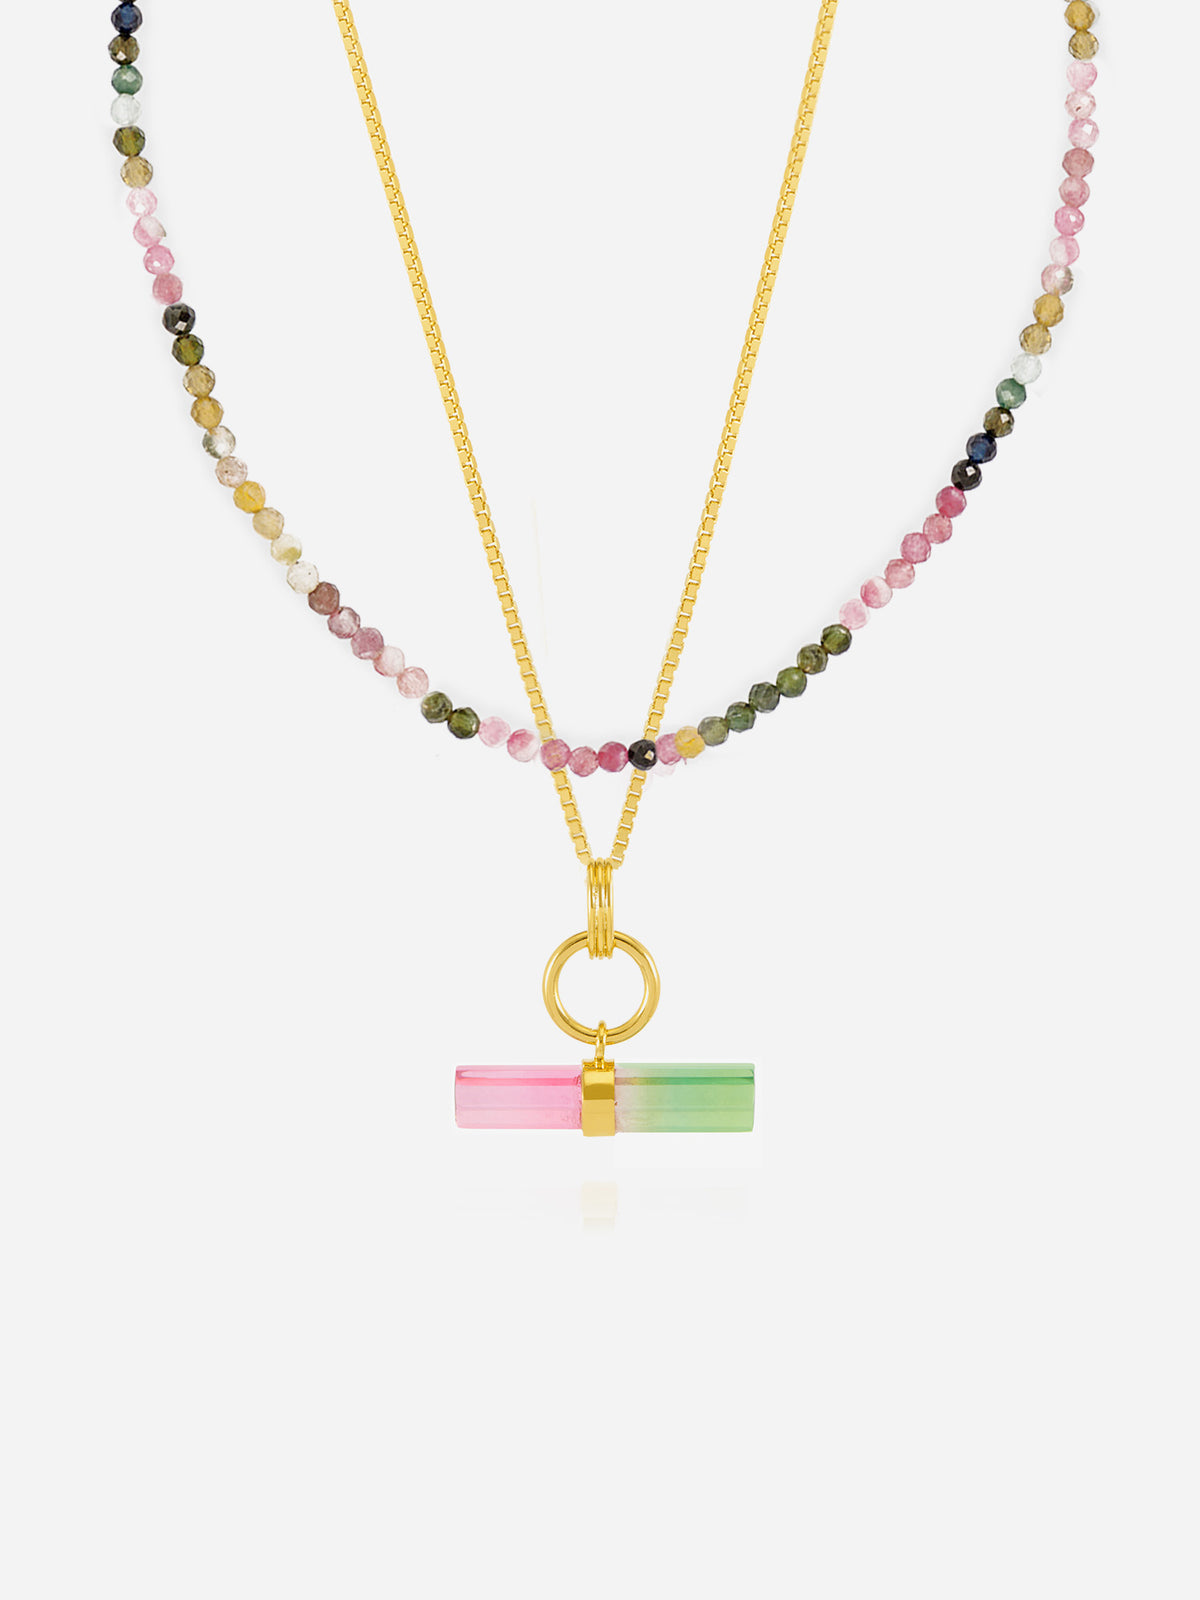 Styled Watermelon T- bar and Gemstone Layered Necklace Set